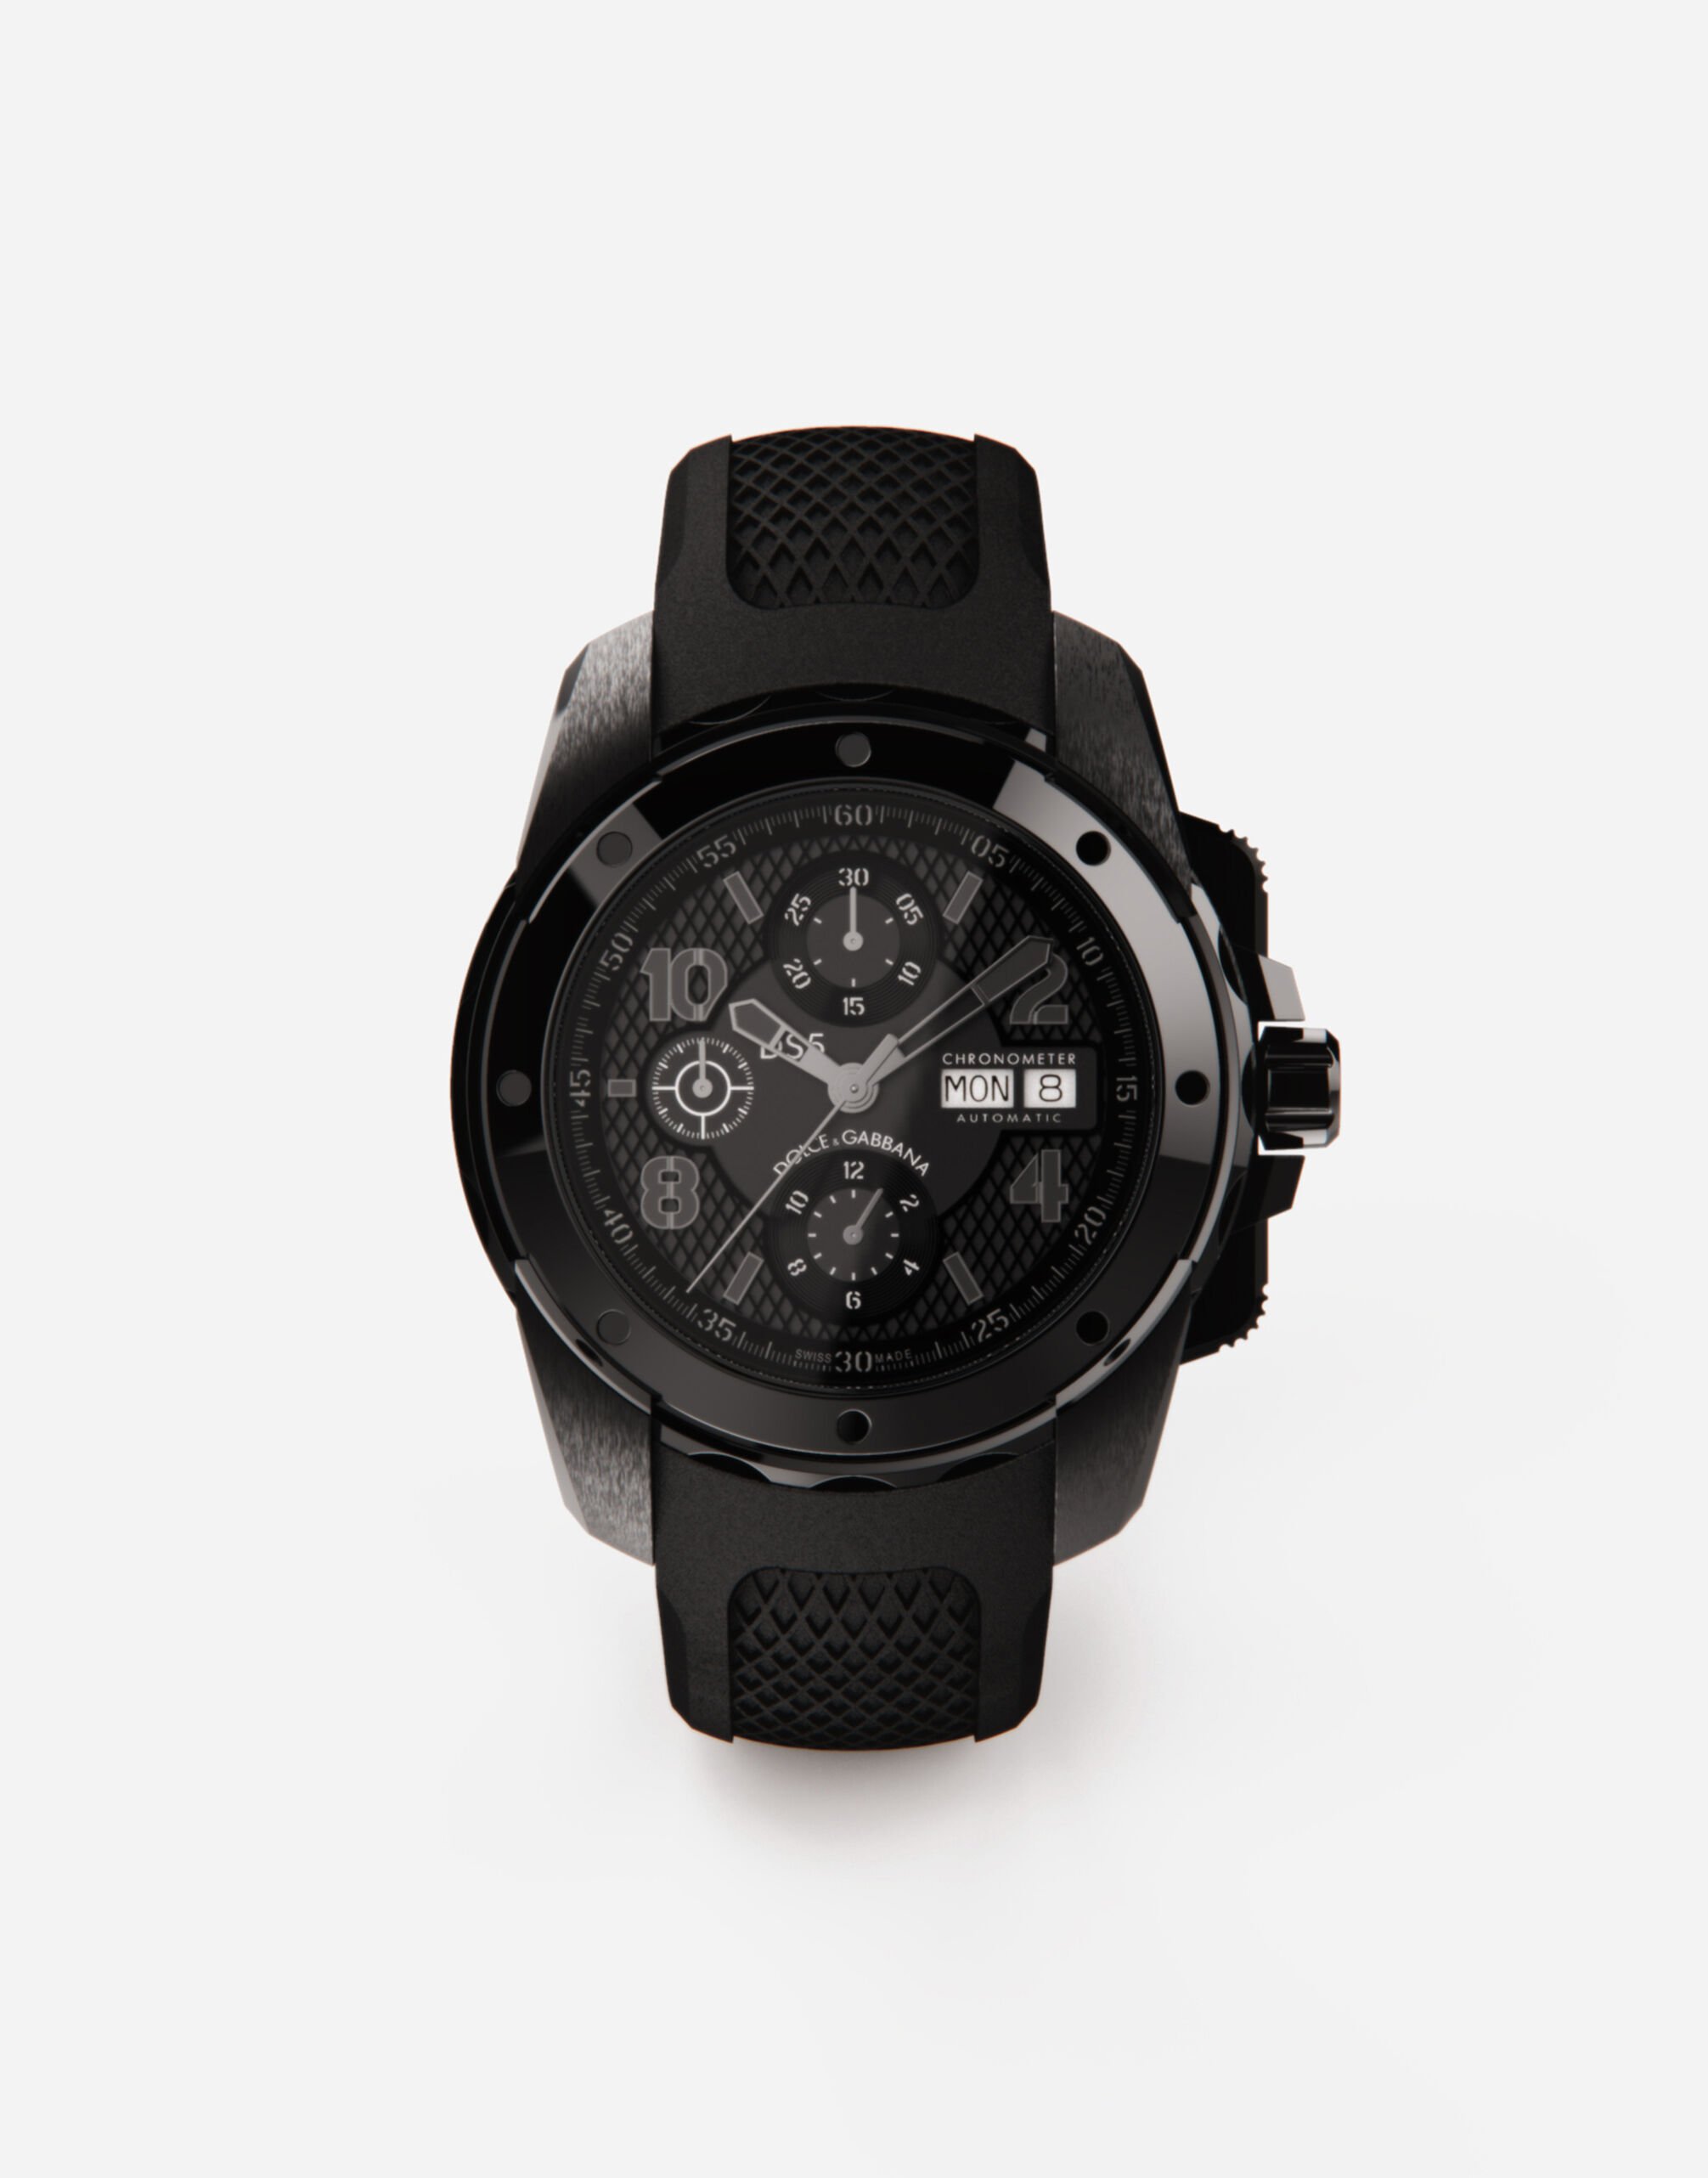 Dolce & Gabbana DS5 watch in steel with pvd coating Black VG4390VP187